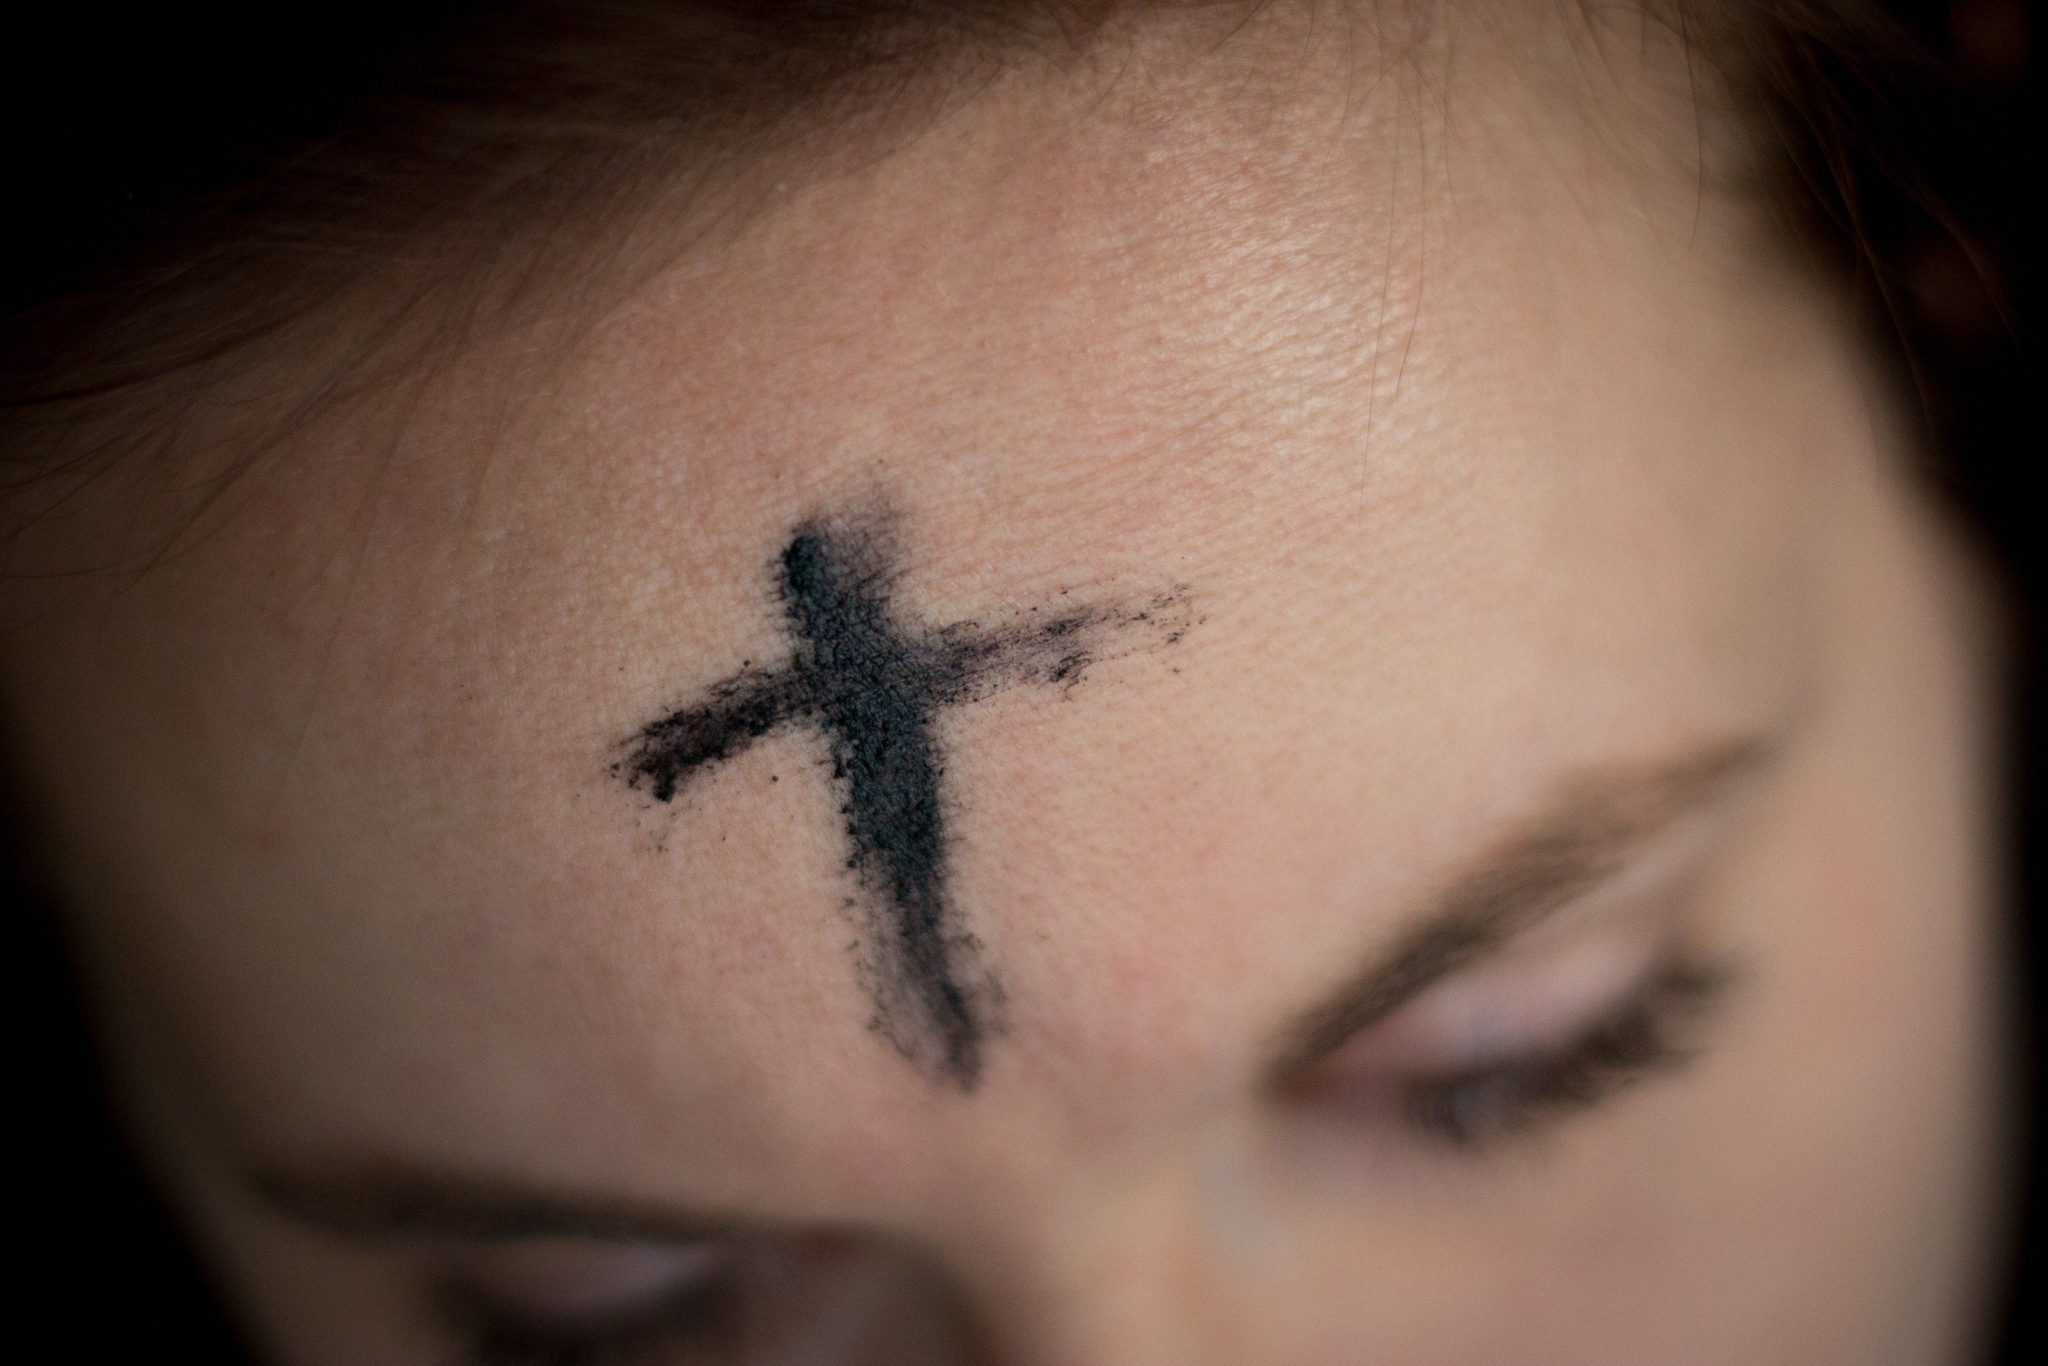 Ashes in the shape of a cross on a person's forehead